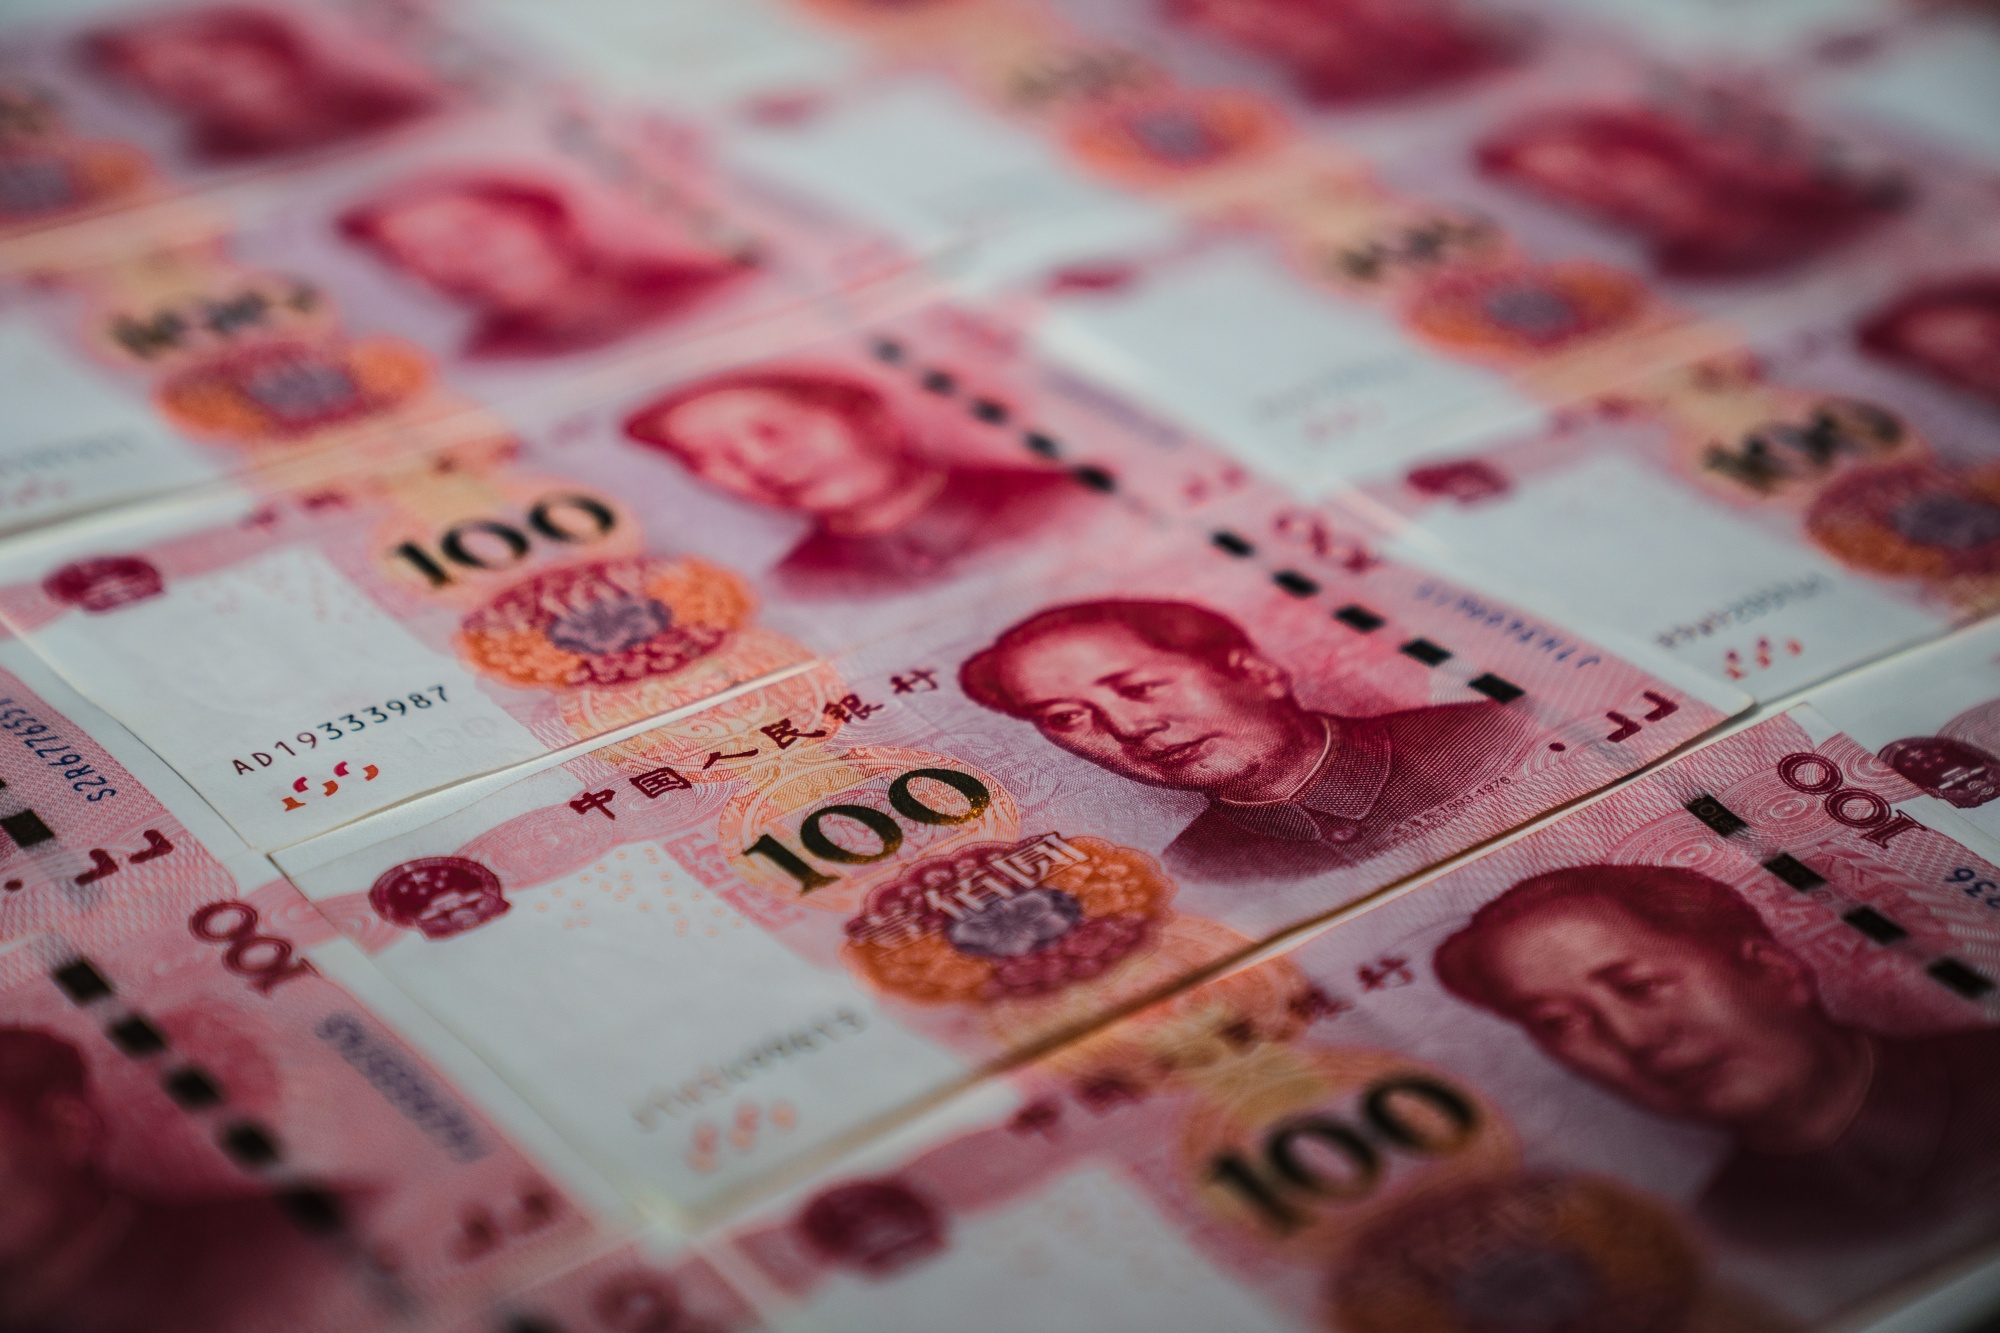 As a source of stability in the global FX market and an anchor for its regional peers, a period of increased yuan volatility risks spilling over into other currencies, even the dollar.